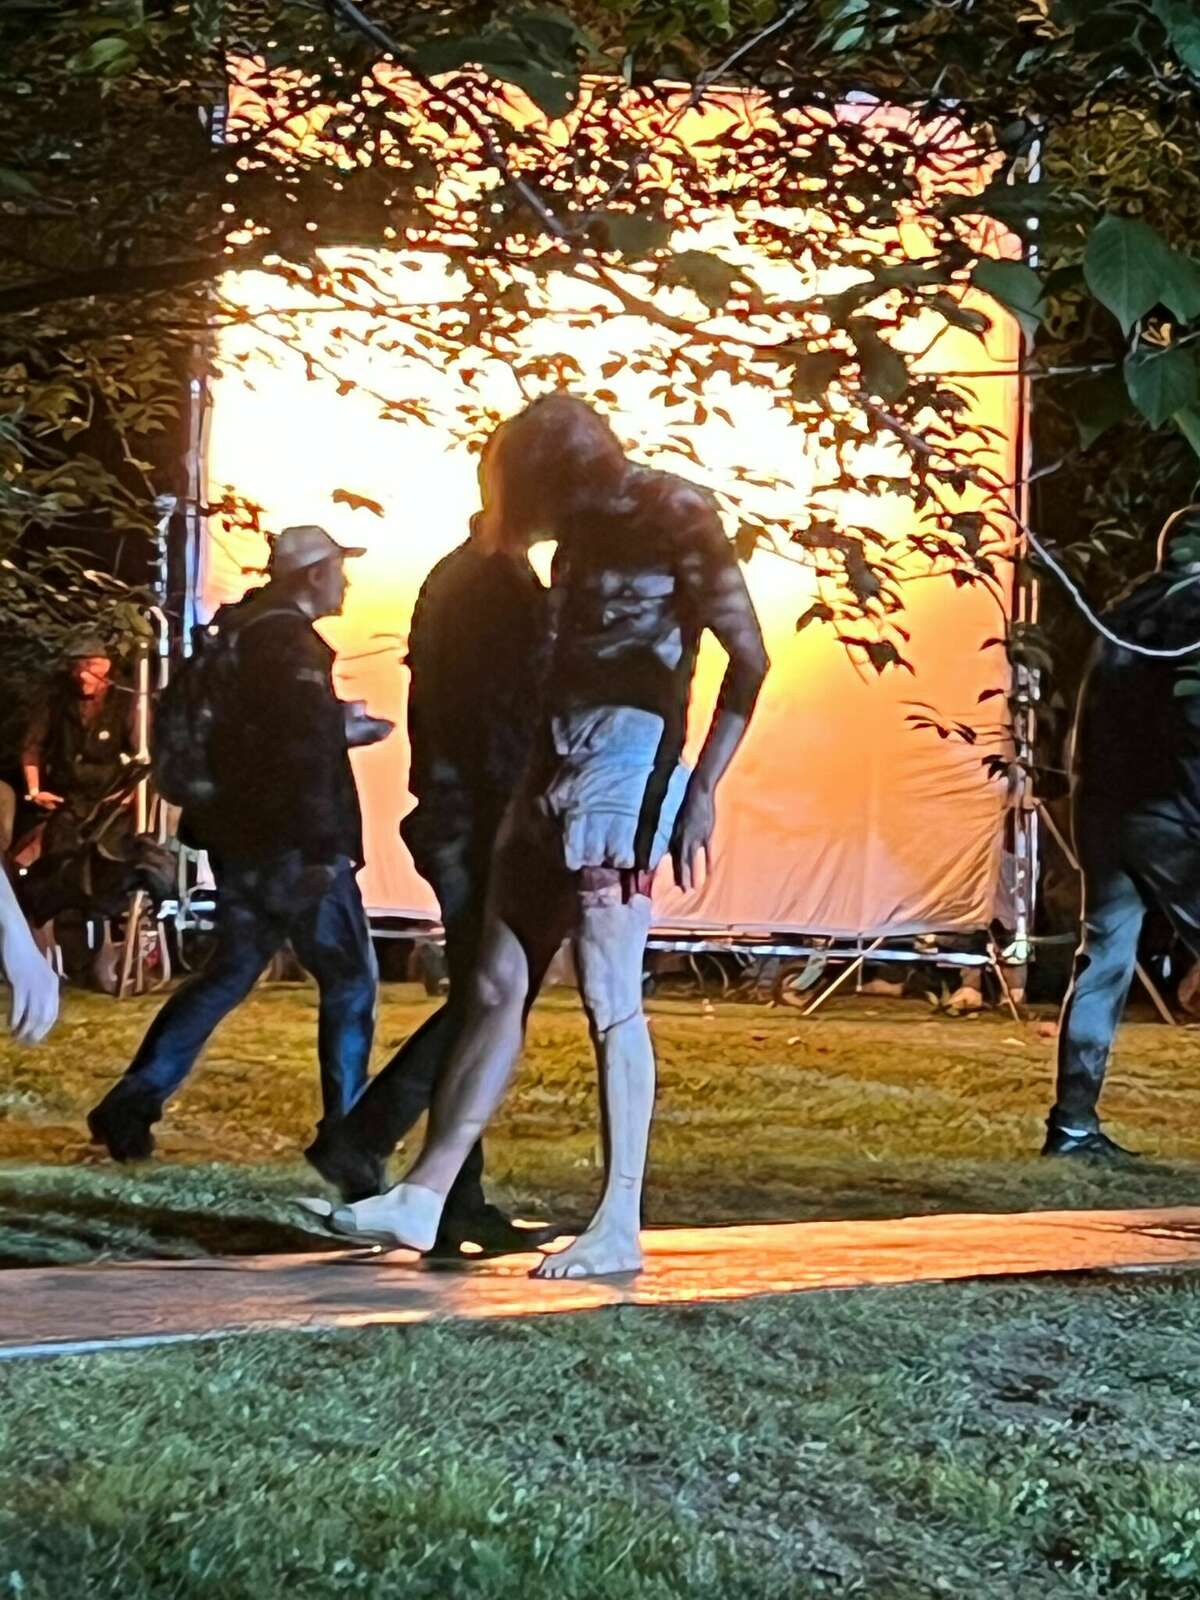 A tall character with bloody knees was spotted during filming of "American Horror Story" season 11. 